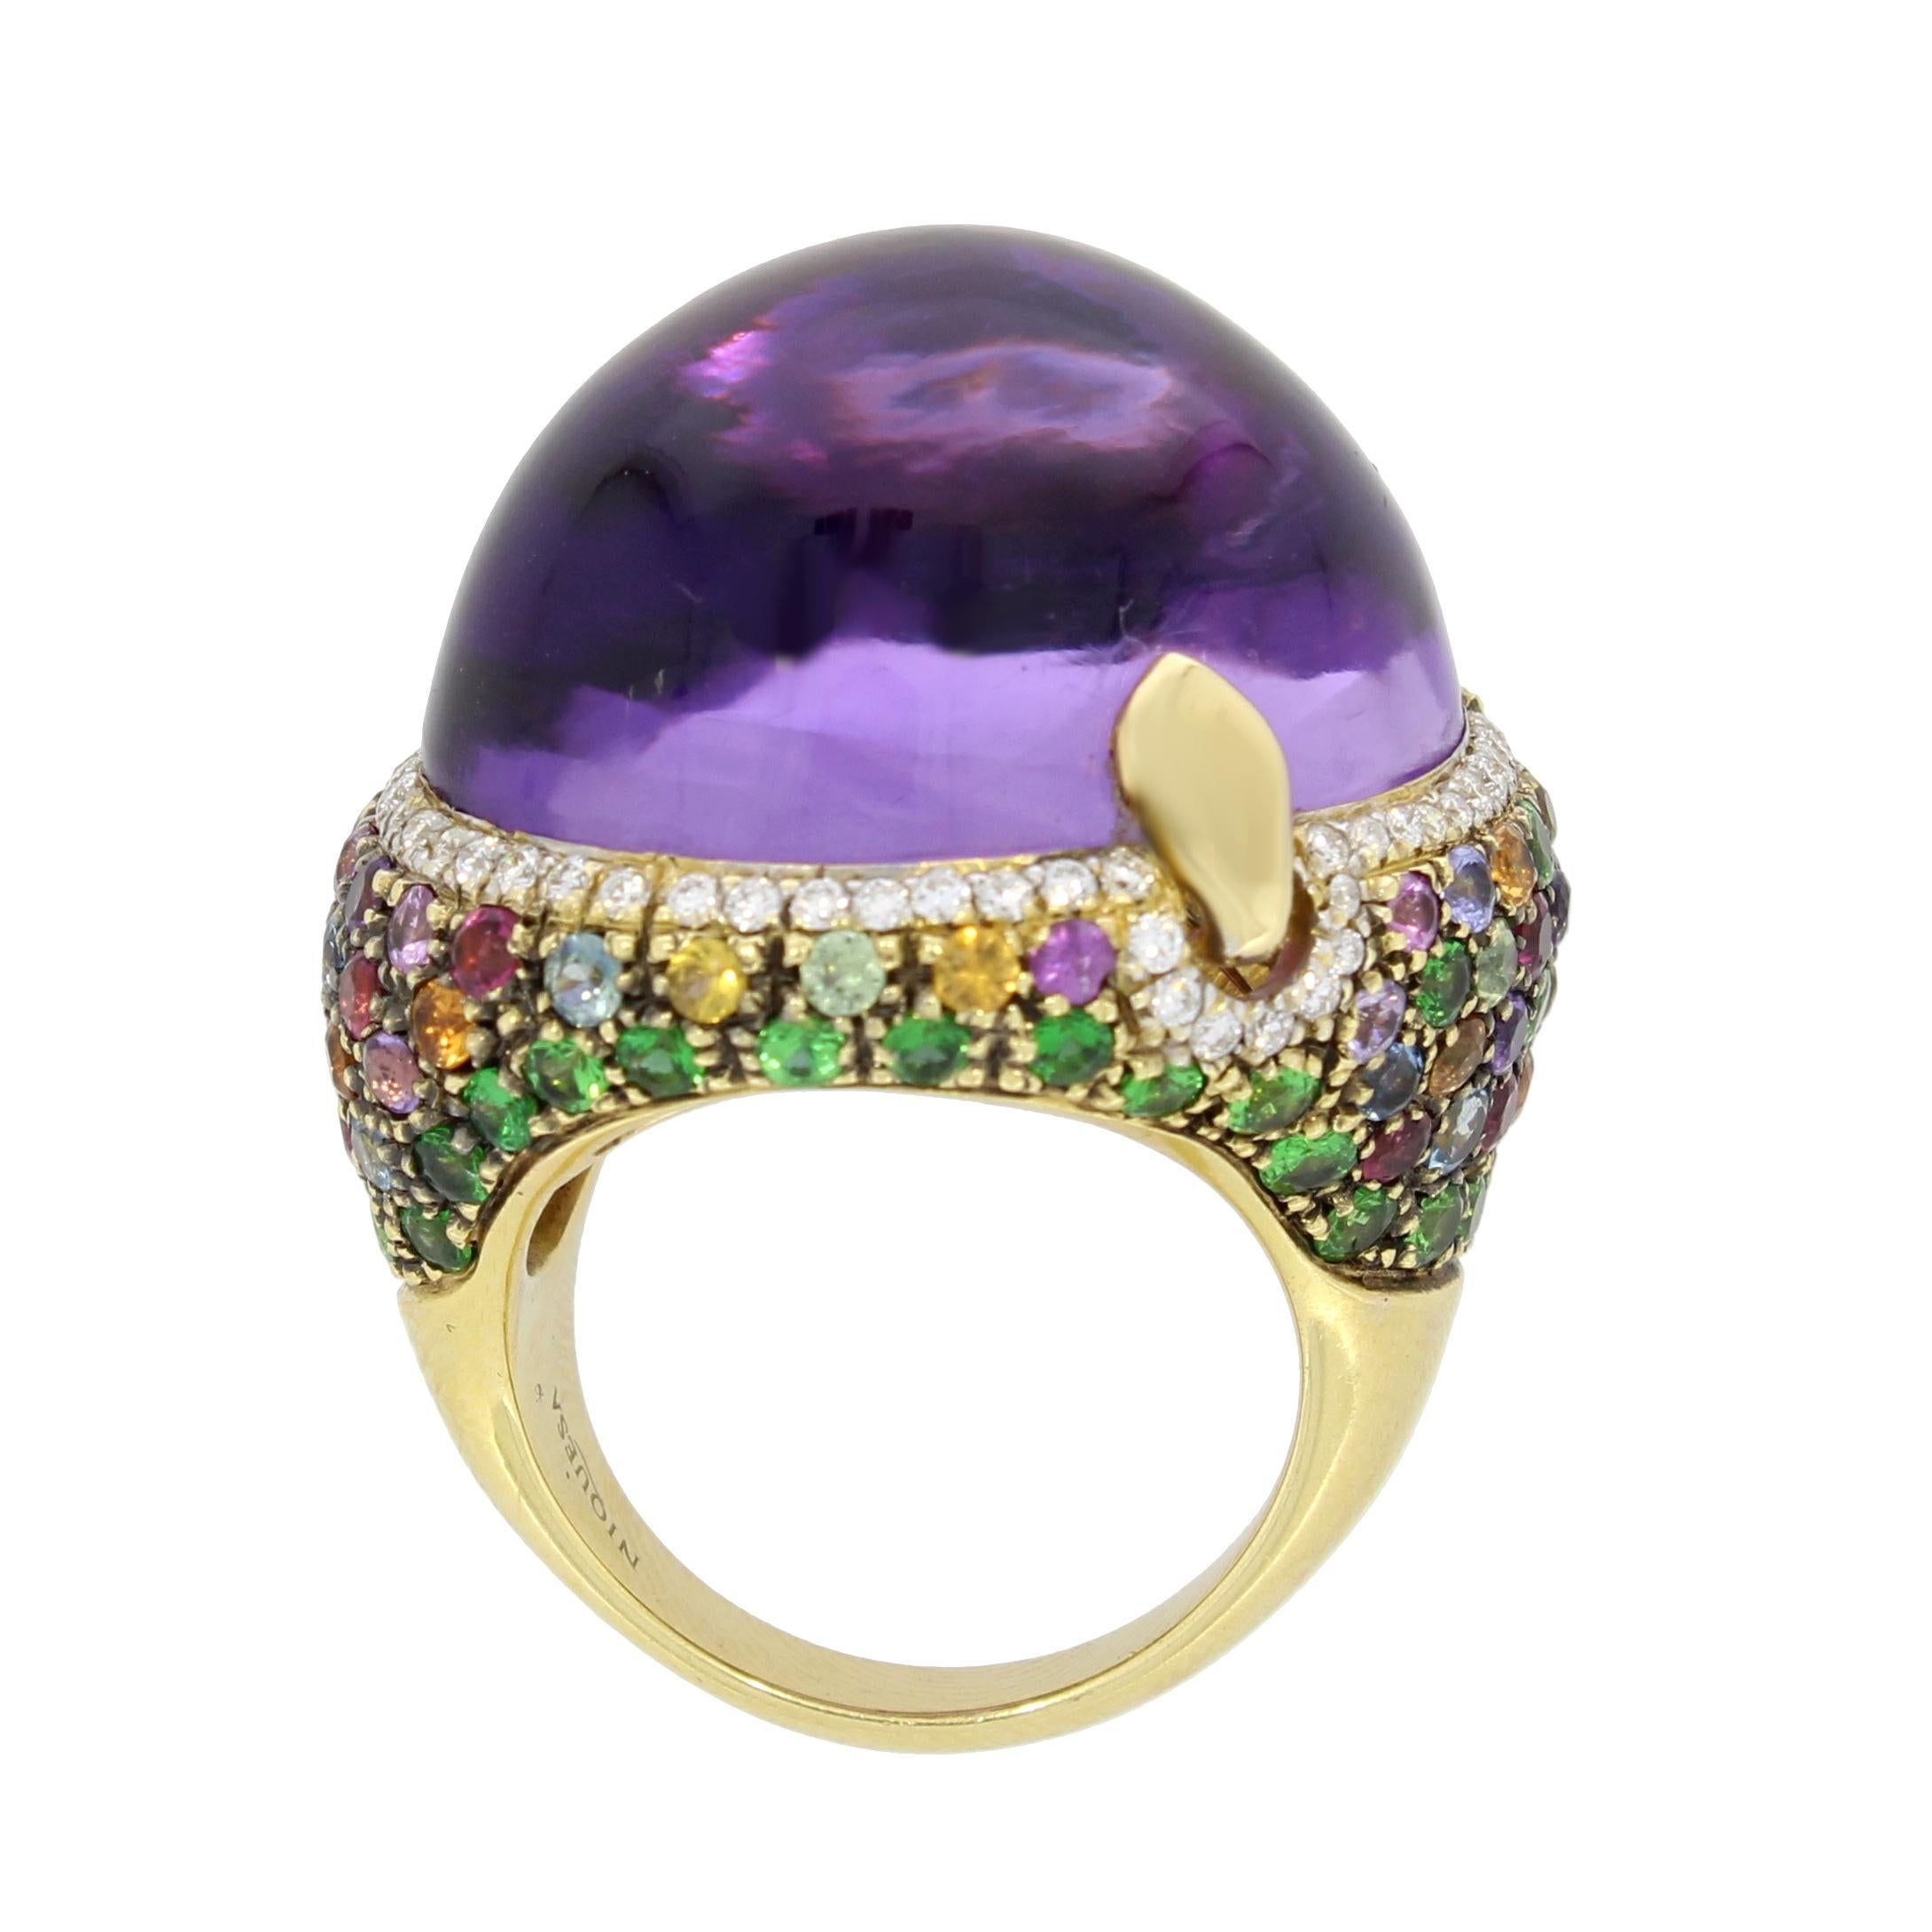 A domed cabochon amethyst encircled by a delicate ring of brilliant cut diamonds, sits above a scintillating rainbow of multicoloured sapphires, punctuated with vivid tsavorites.

Venice Amethyst Ring by Niquesa
Details:
18 karat Rose Gold          